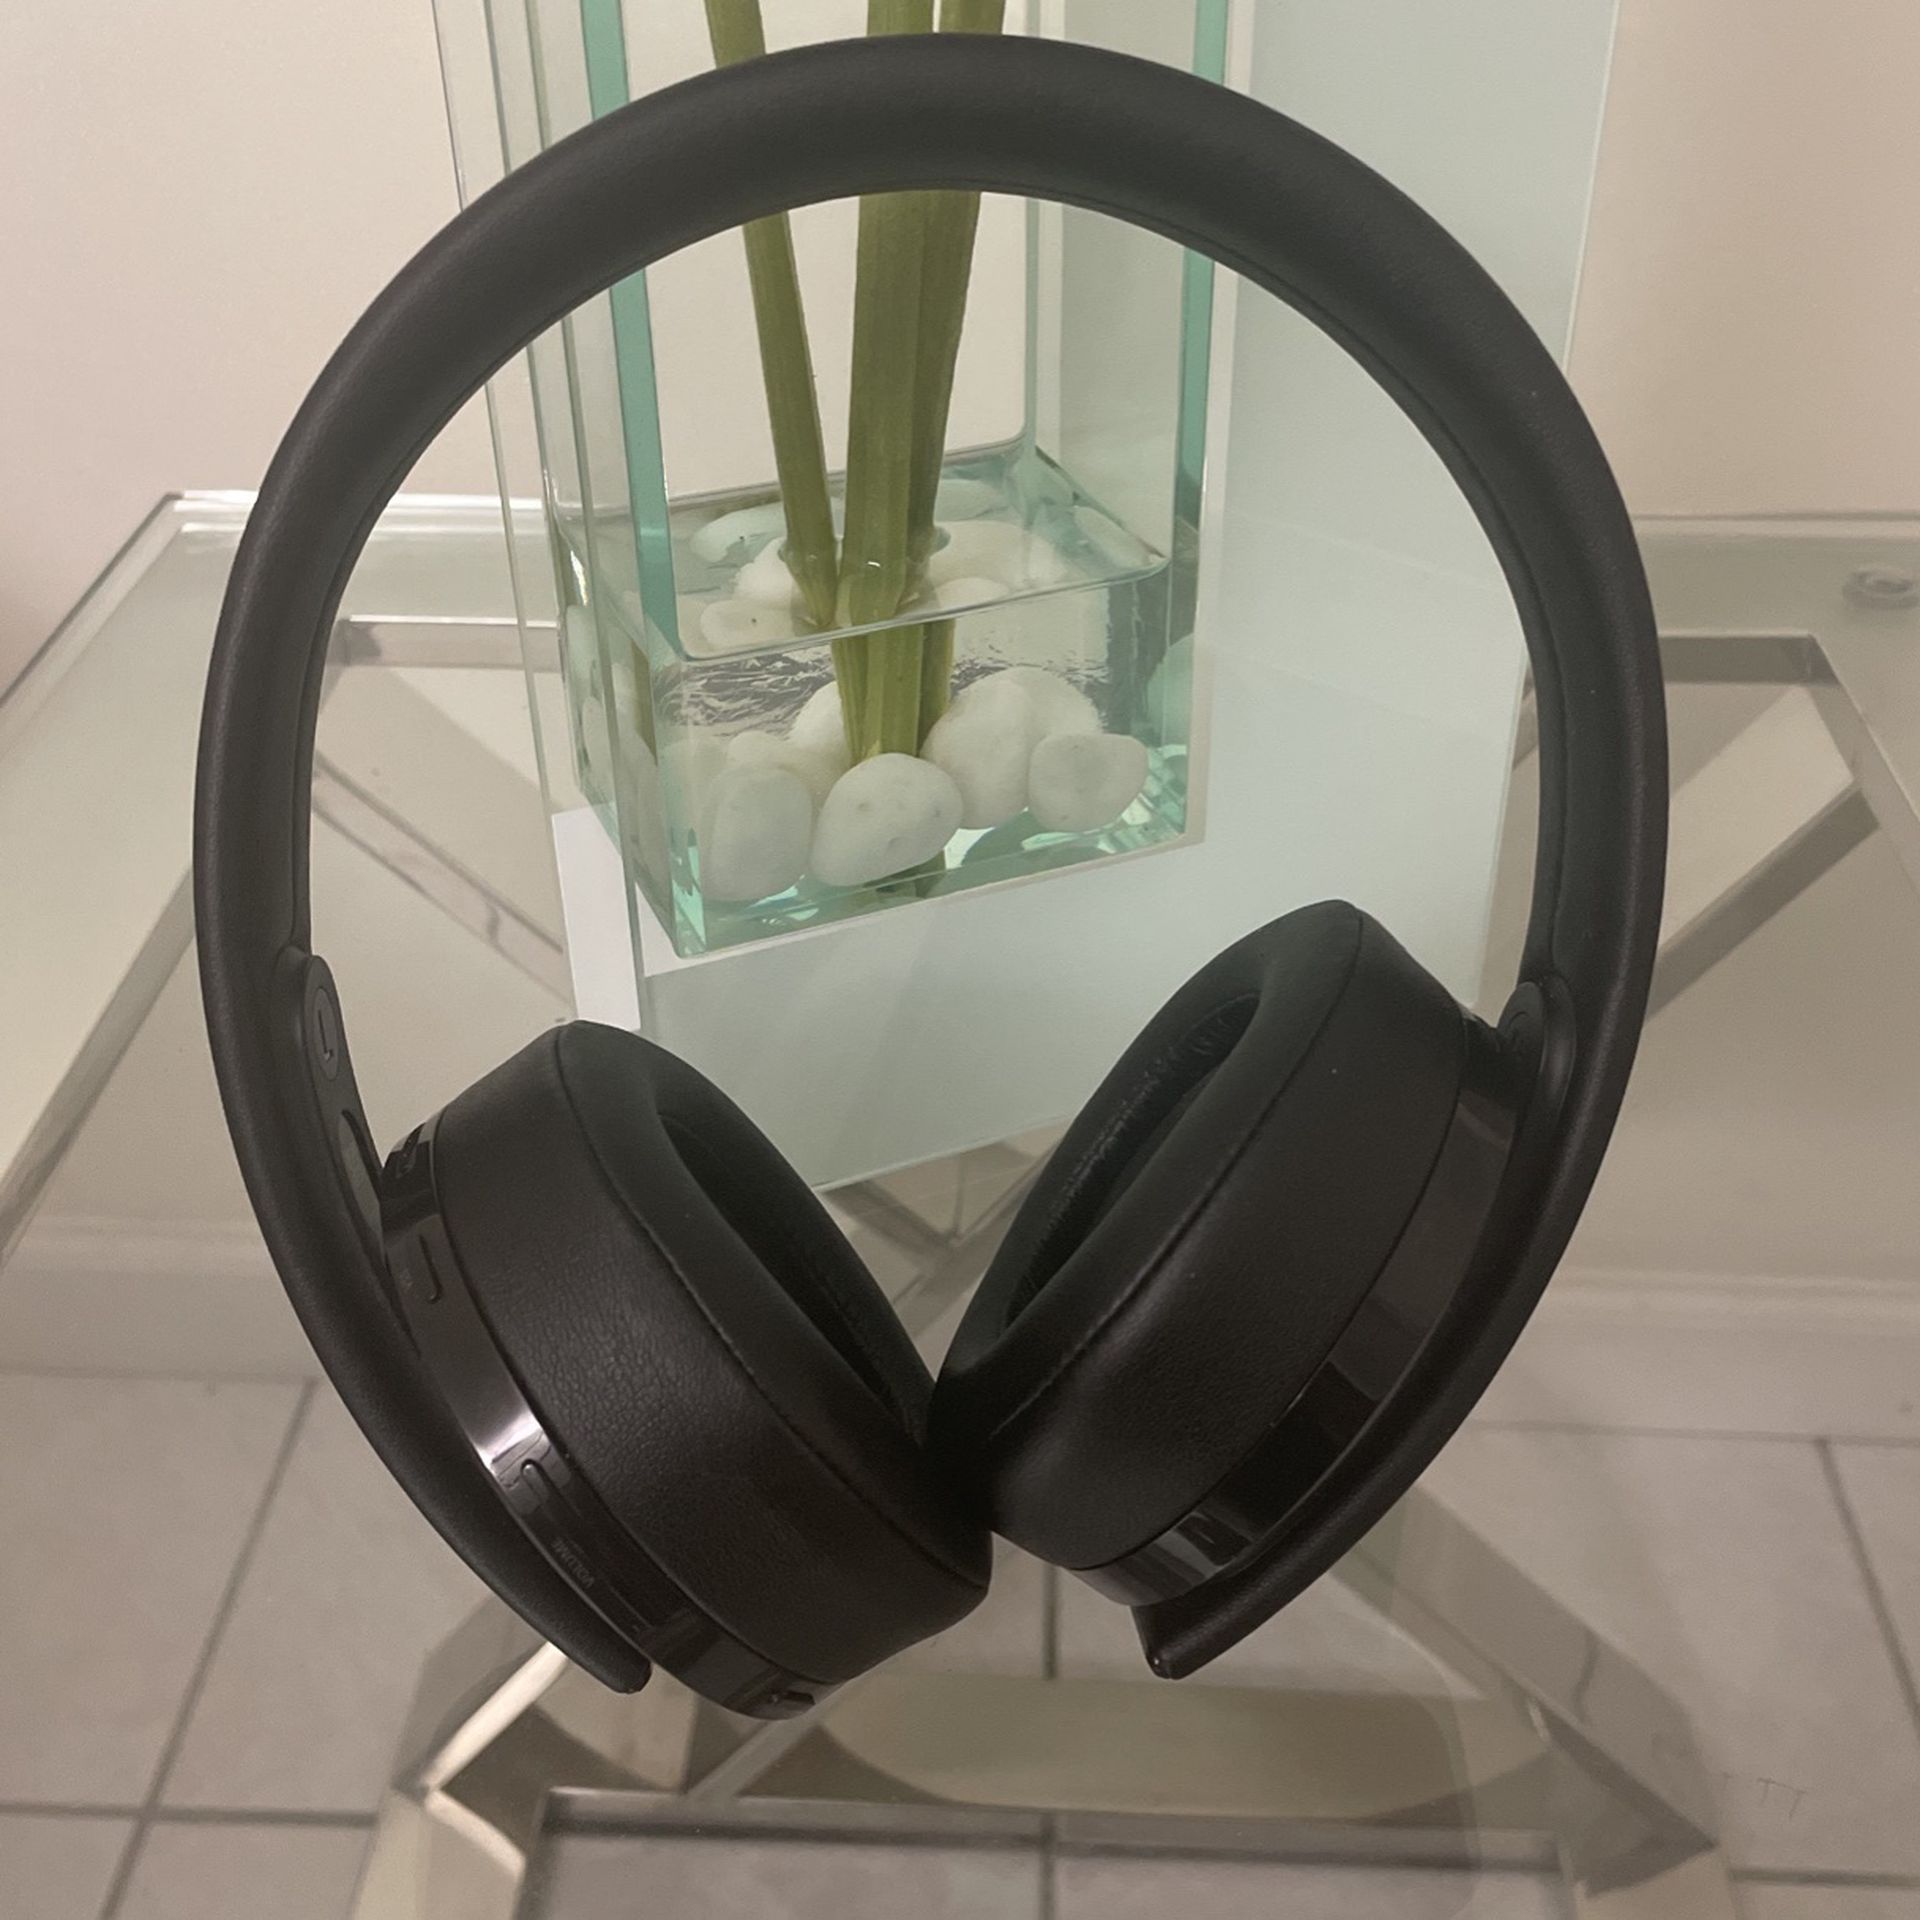 PlayStation Gold Wireless Headset